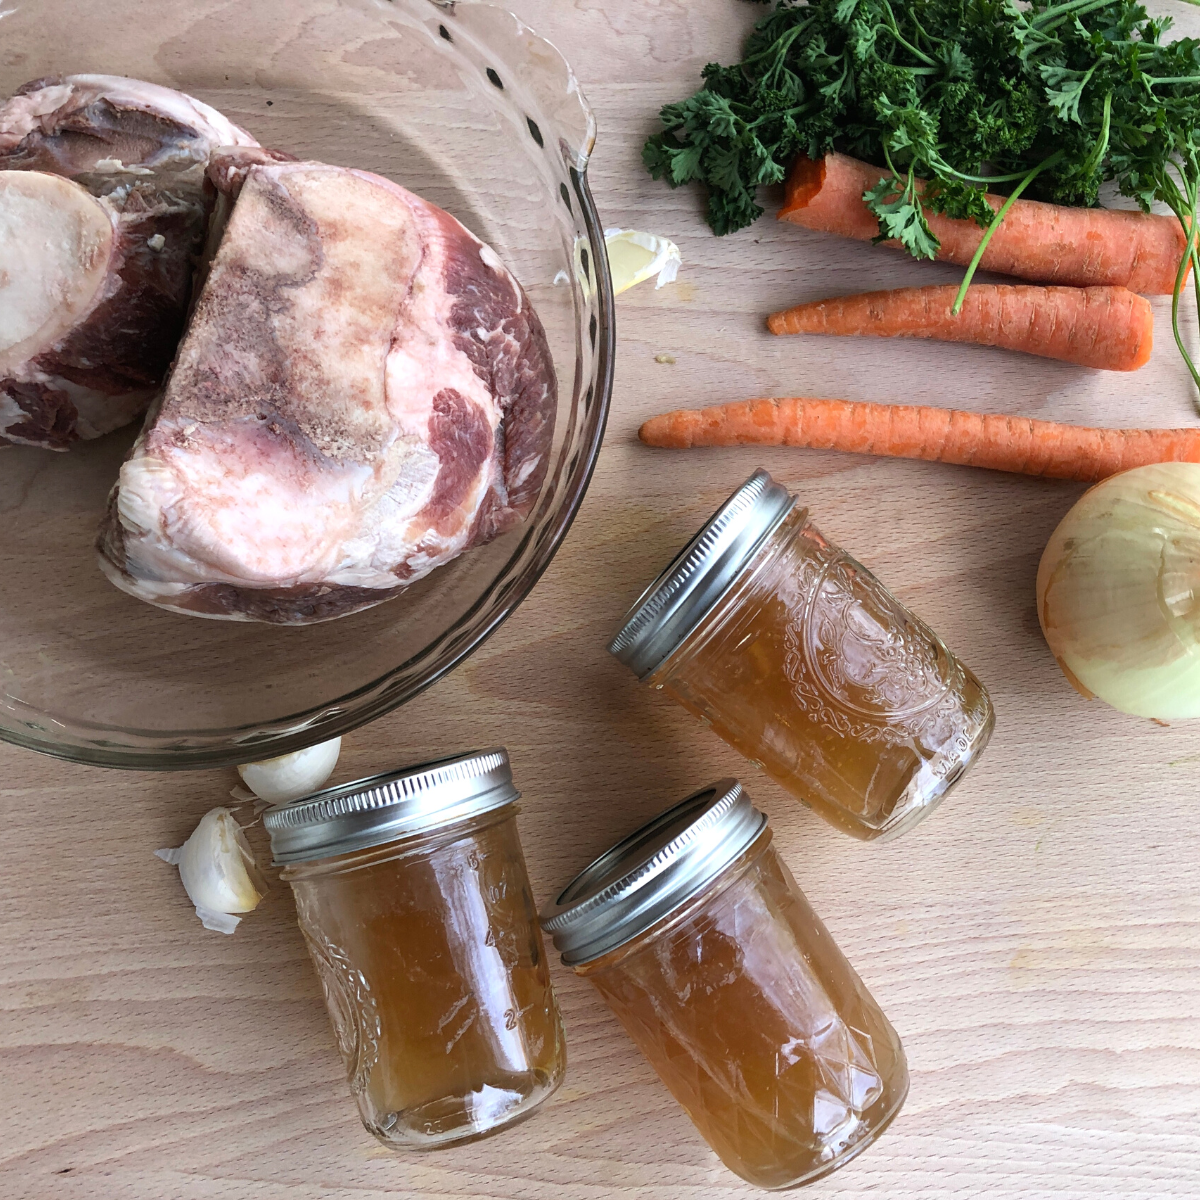 How to Make Bone Broth (stovetop, slow cooker or pressure cooker